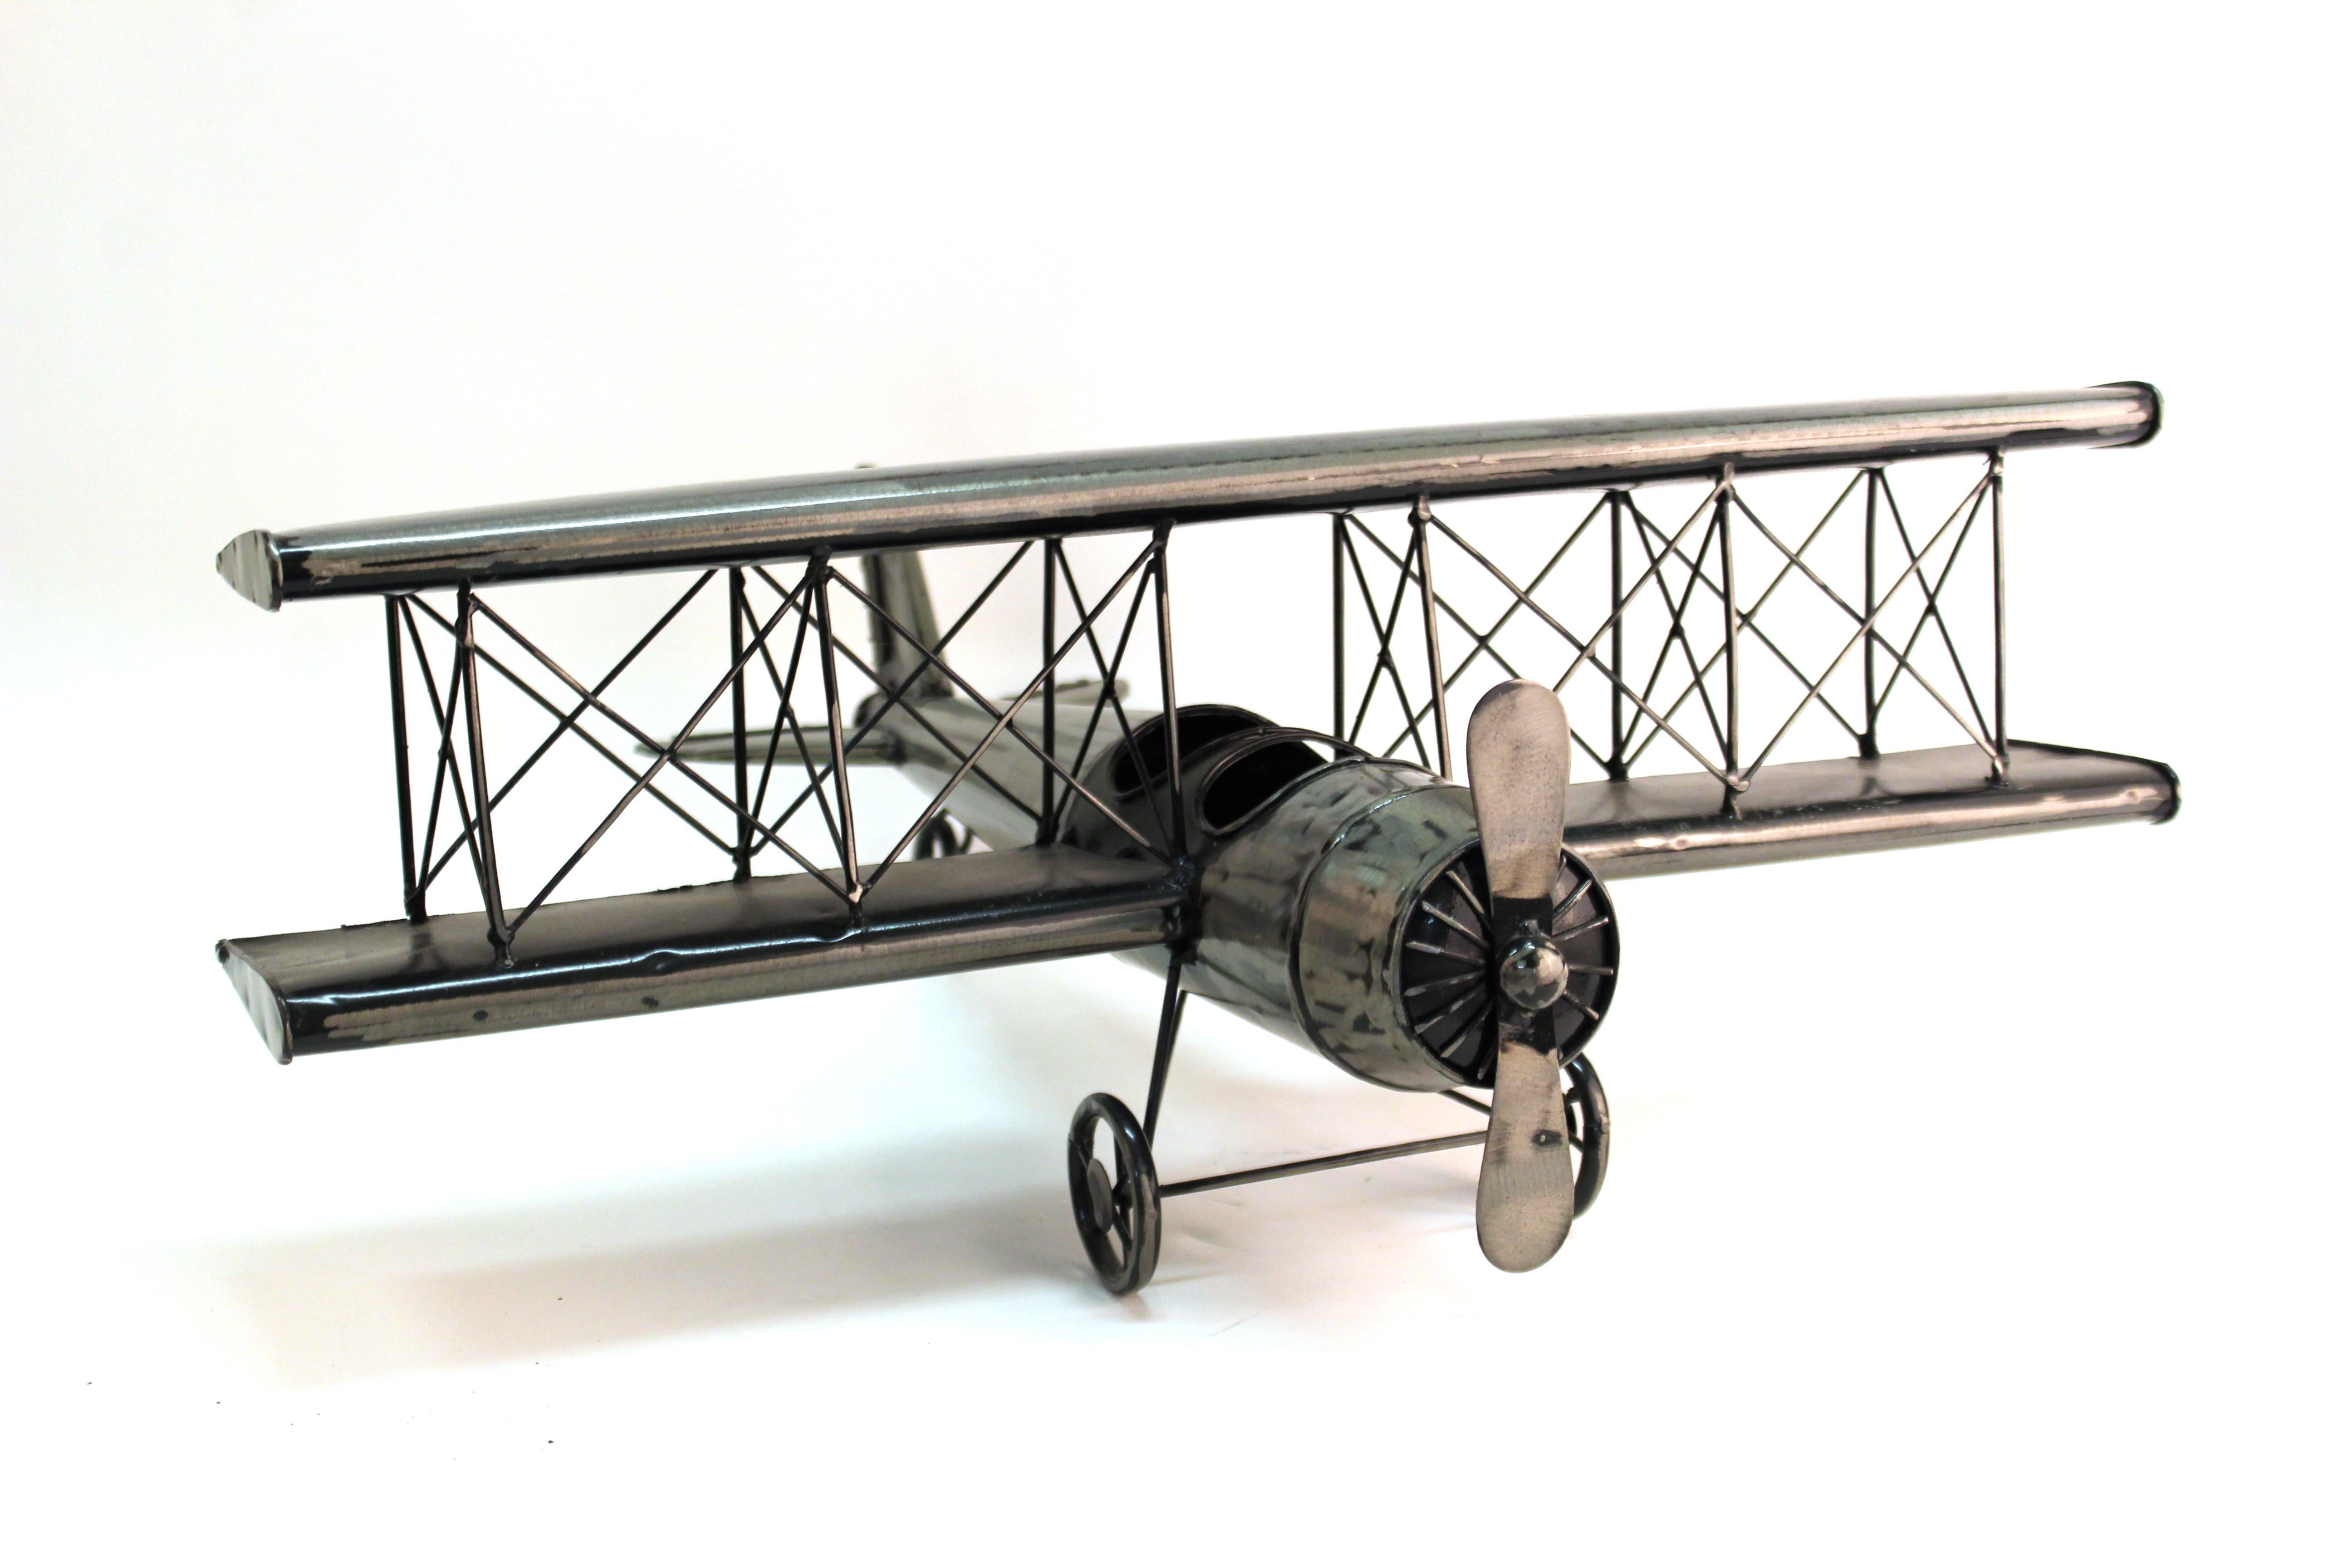 Modern metal built collectible scale model of a vintage airplane. The piece has a rotating propeller. In great vintage condition with age-appropriate wear and use.